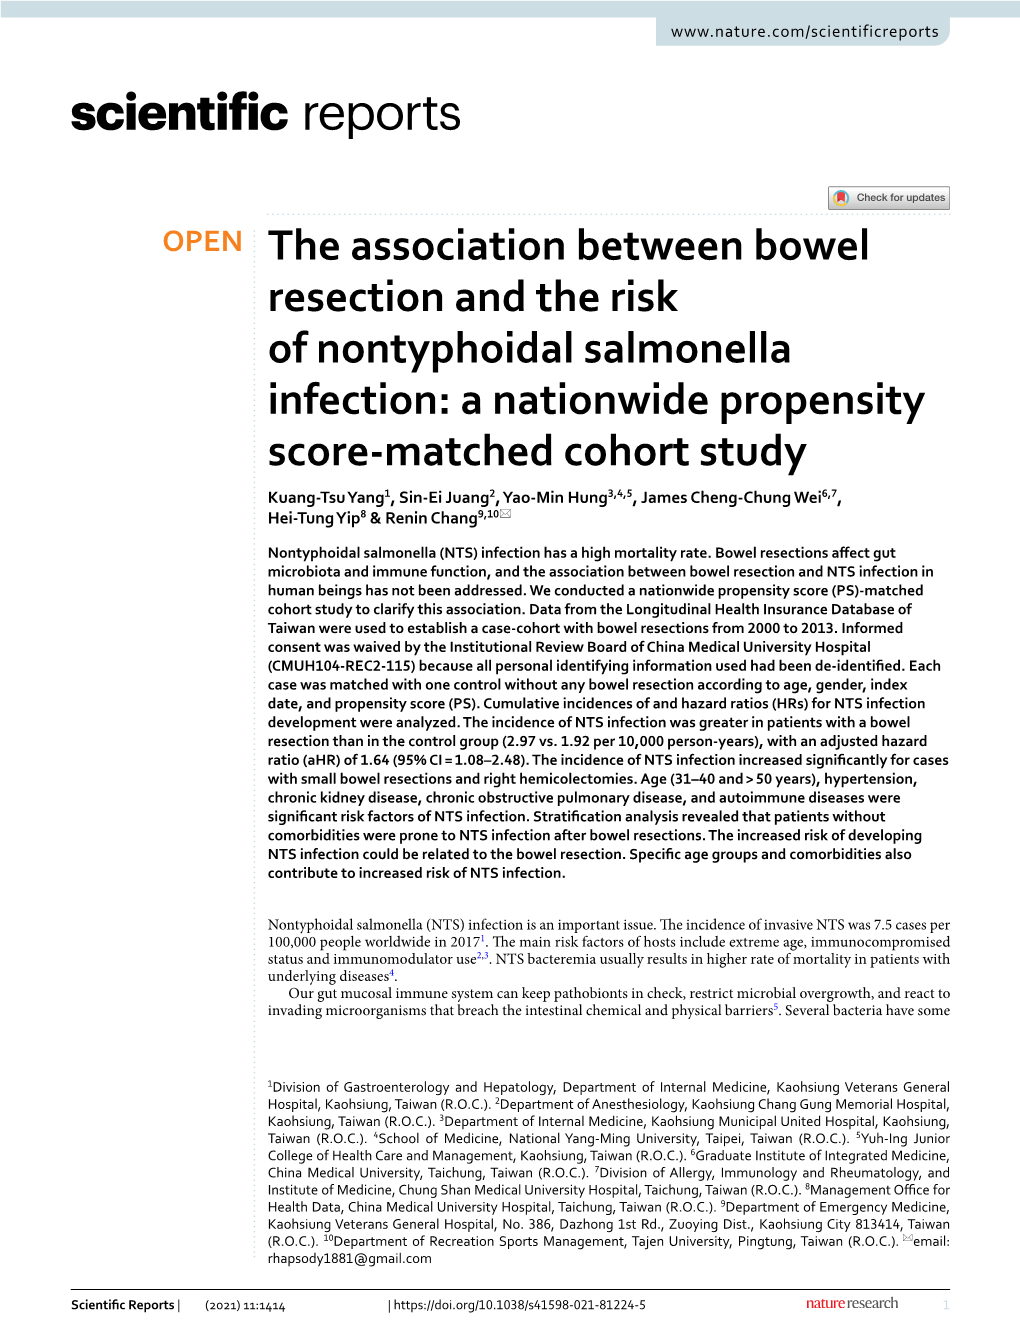 The Association Between Bowel Resection and the Risk Of